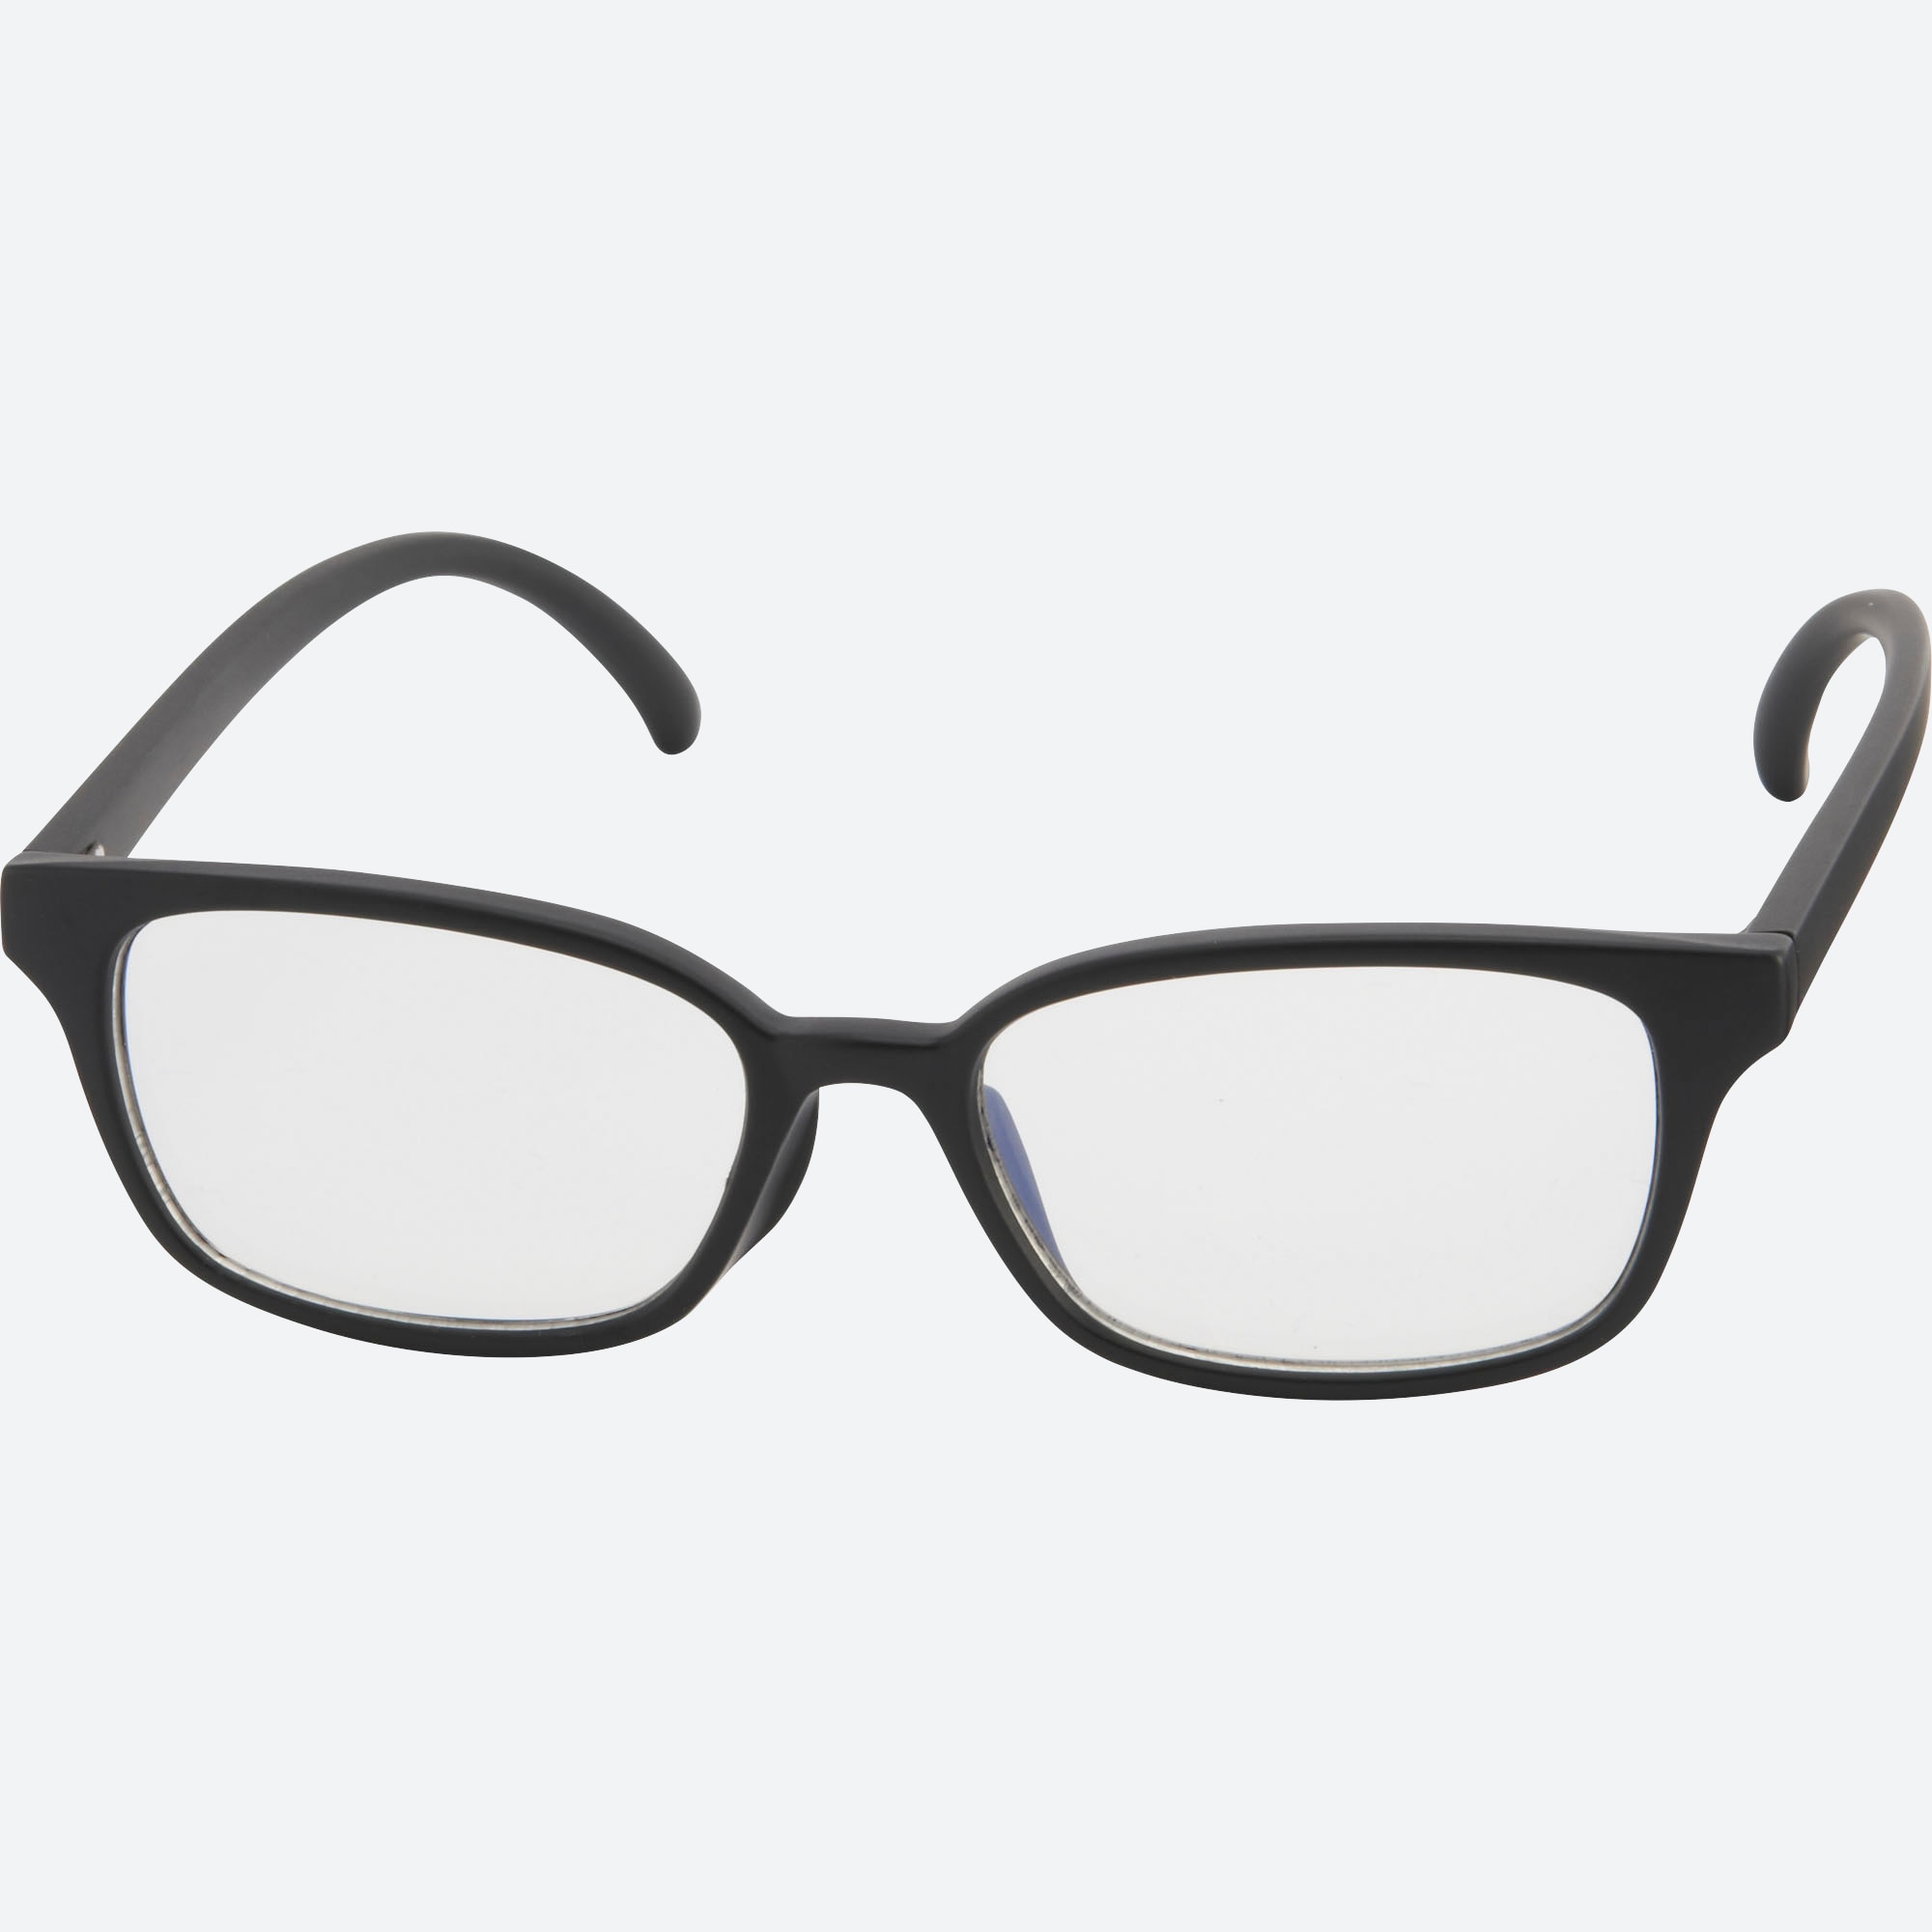 where to get clear lens glasses